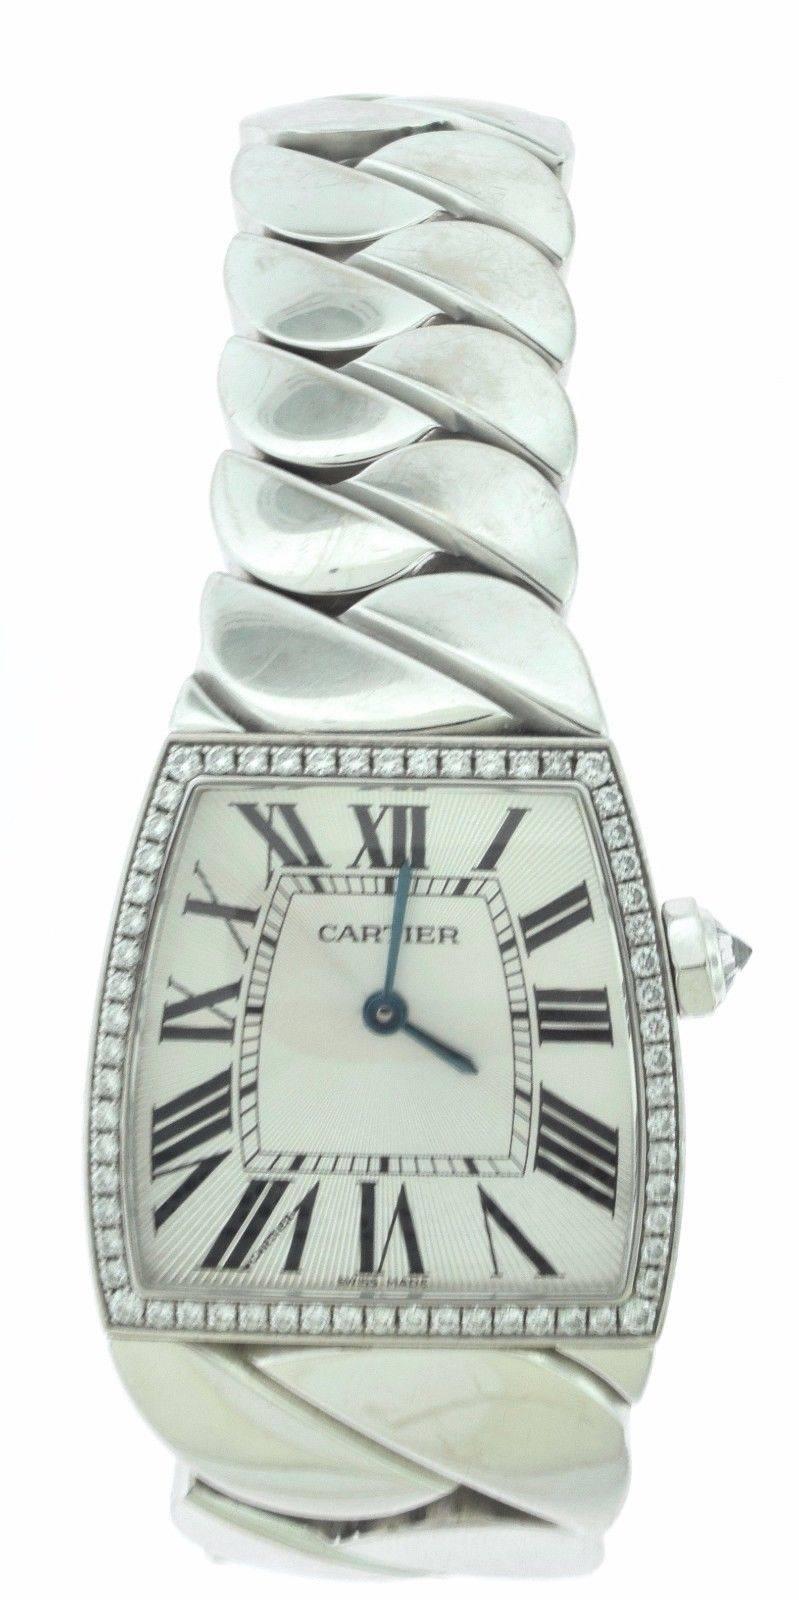 Brand: Cartier
Model: Diamond La Dona
Watch Label: Swiss Made
Movement: Swiss Quartz  Accuracy Mvmnt
Case: White Gold & Diamonds
Dial: Silver Guilloche
Buckle: White Gold Deployment Clasp
Water Resistance: 30 m (3 ATM) / 100 feet
Functions: